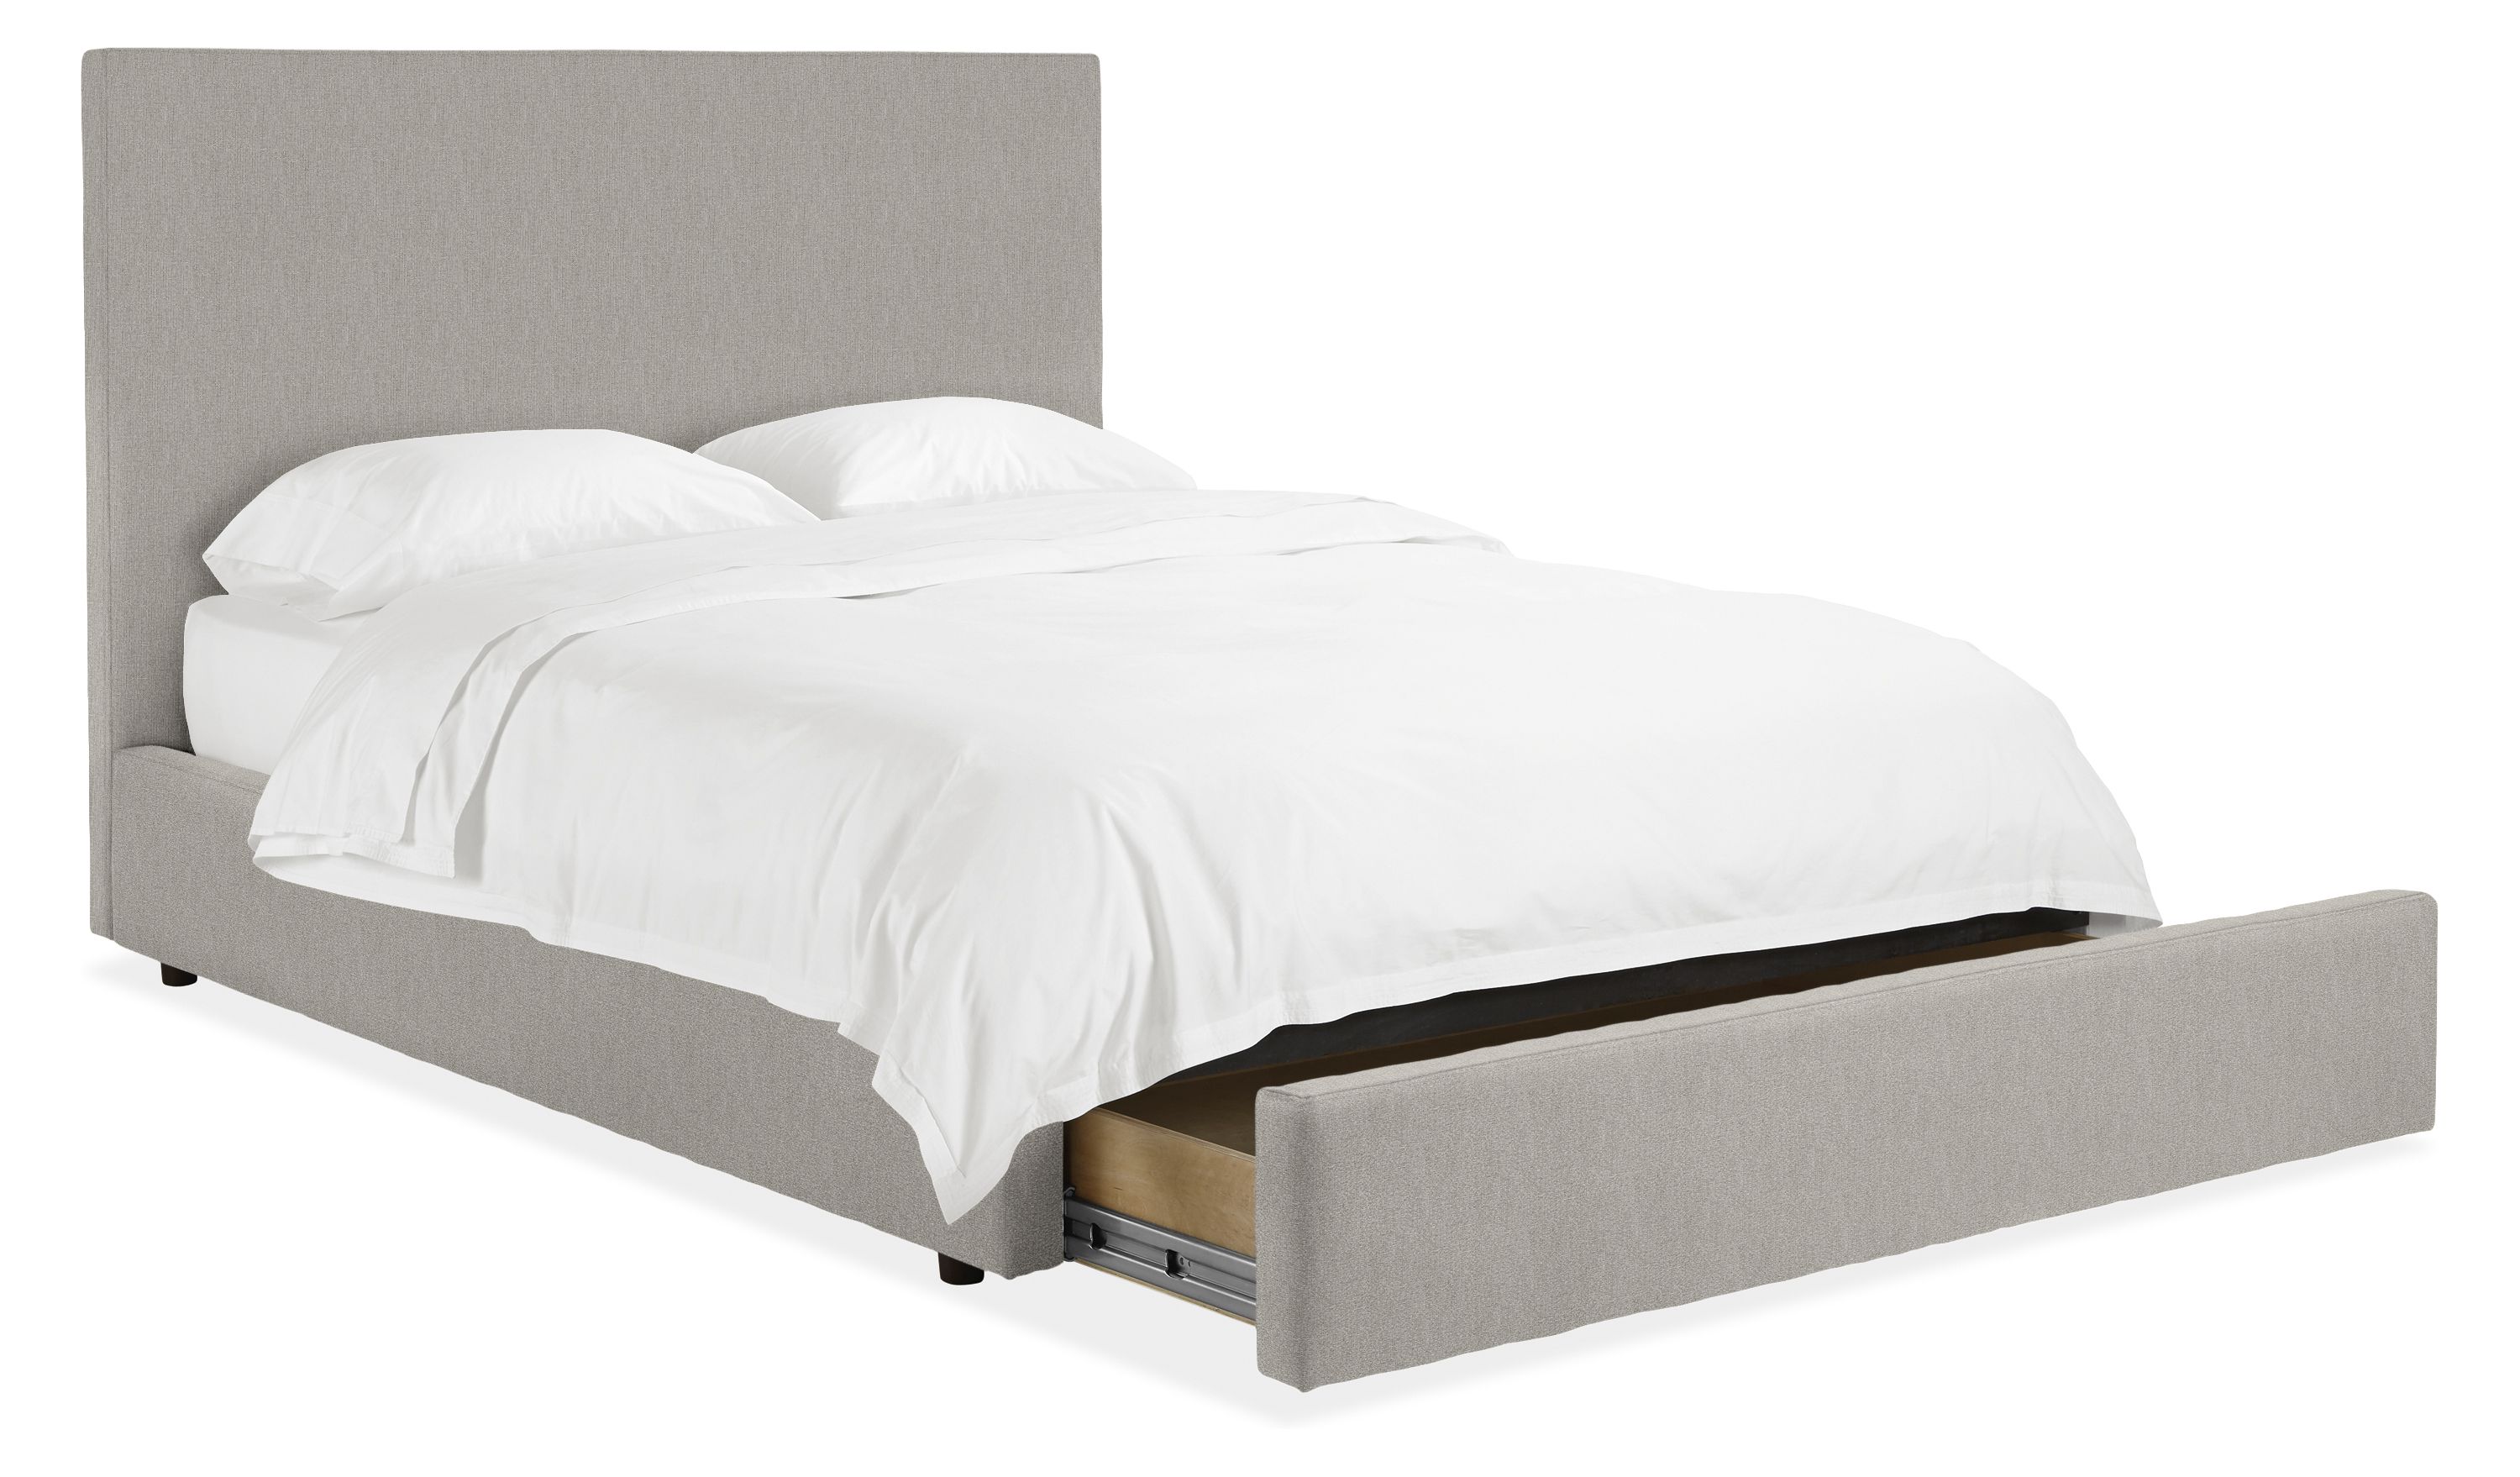 Wyatt Storage Bed Modern Bedroom, Room And Board King Size Bed